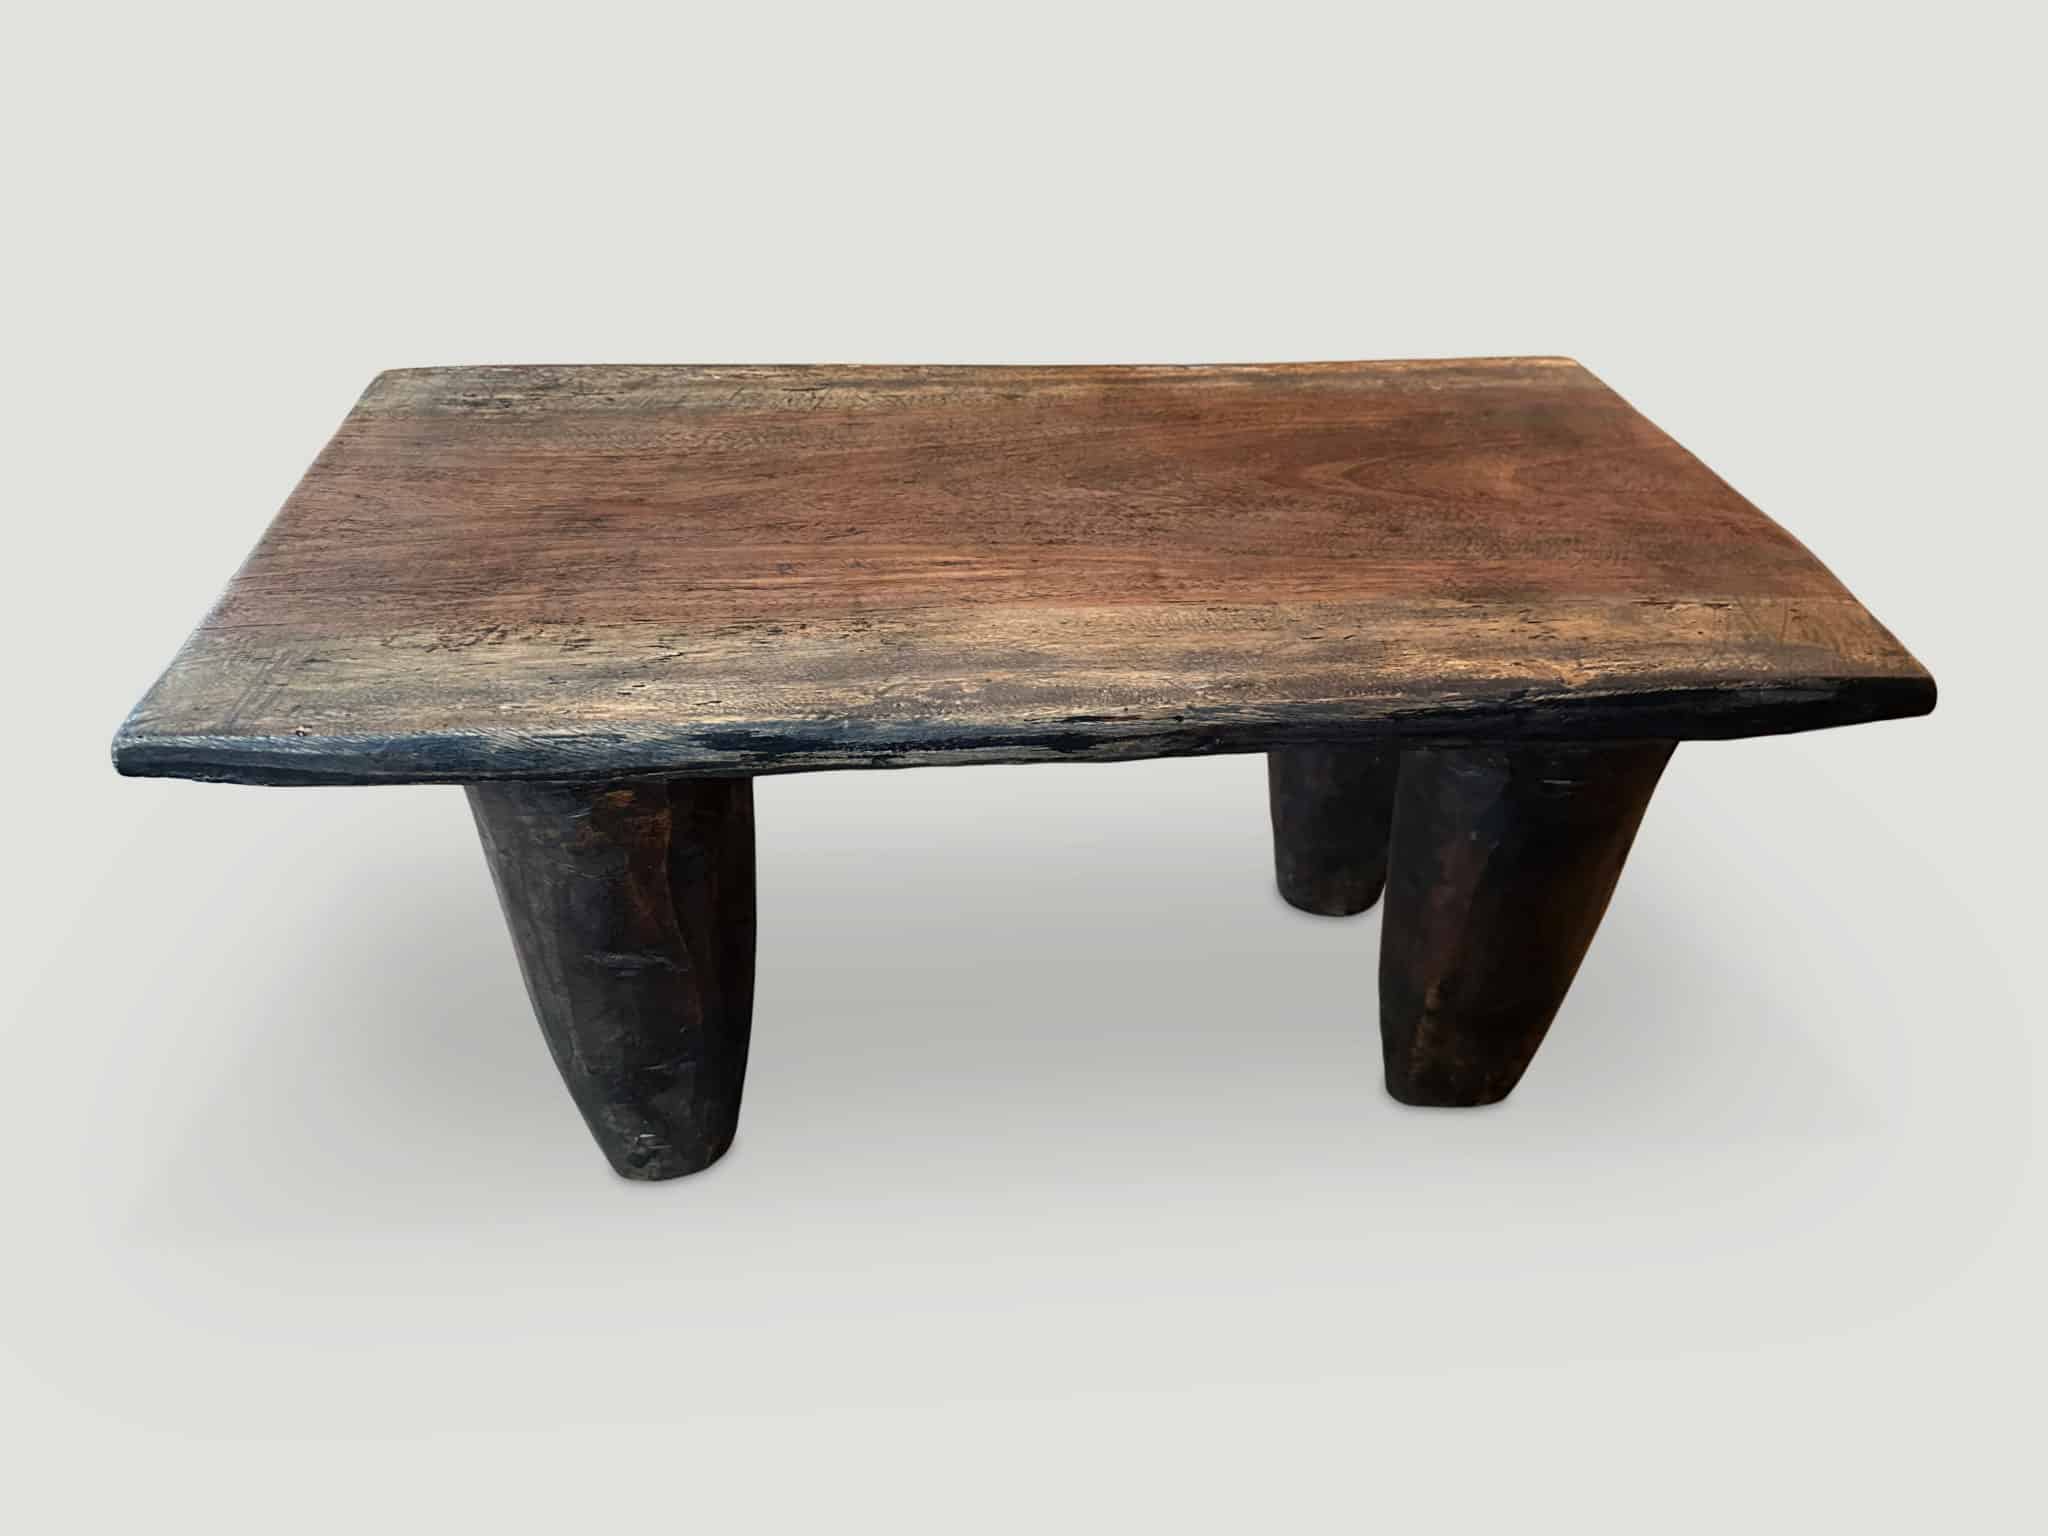 ANTIQUE AFRICAN SENUFU COFFEE TABLE OR BENCH